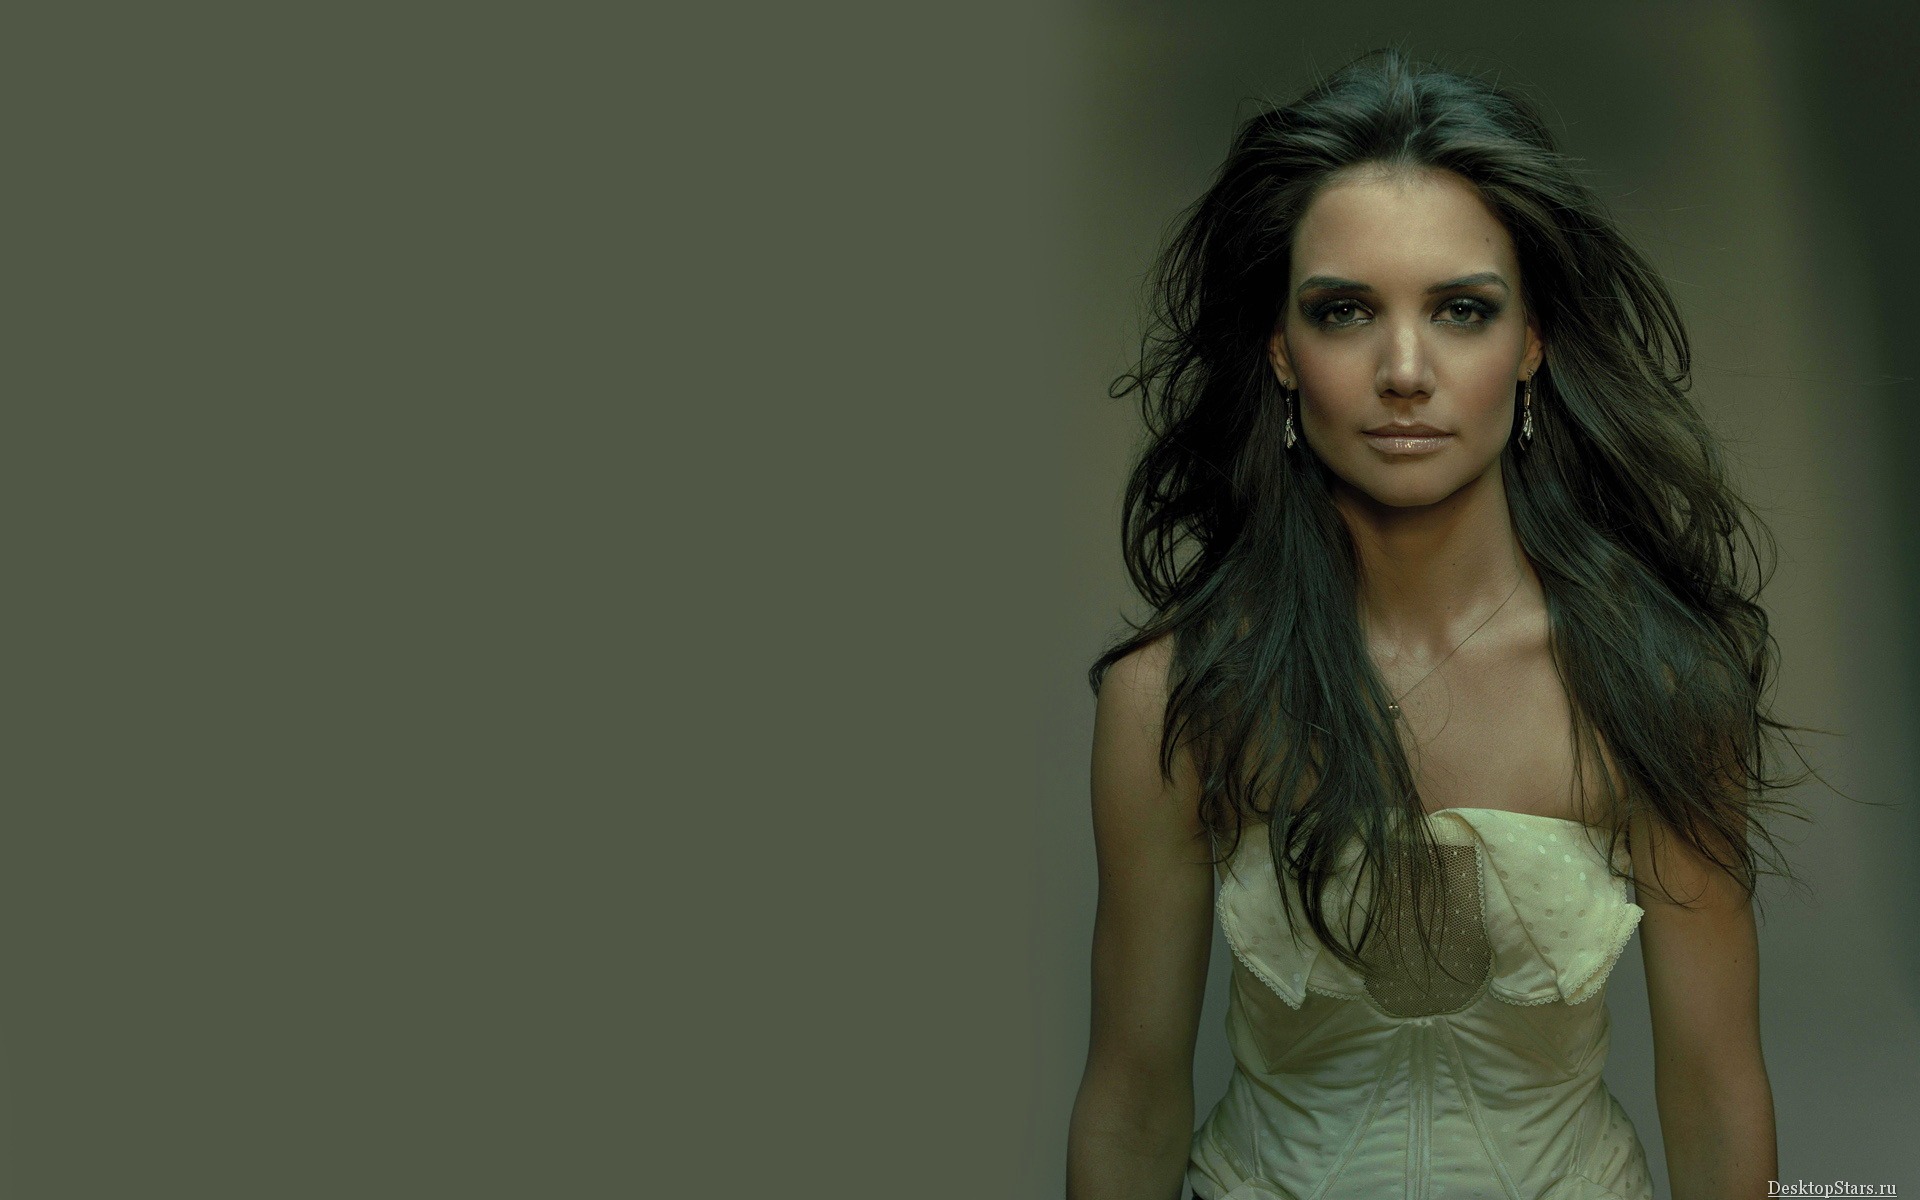 Katie Holmes Wallpaper High Resolution And Quality